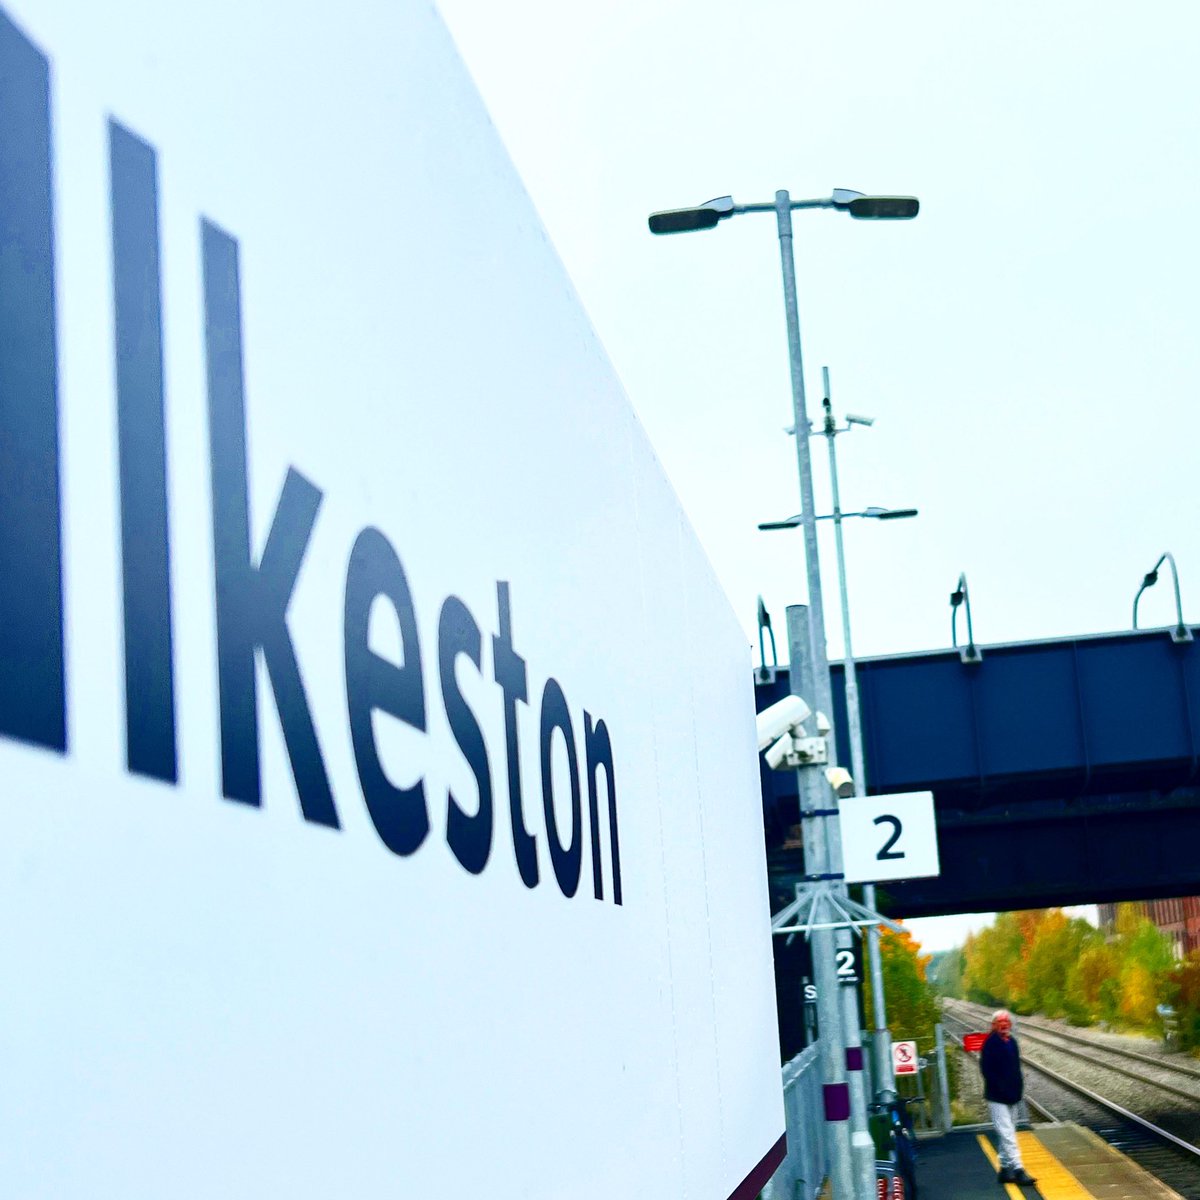 90 architecture students from @TrentUni are studying @ILKONarts how Ilkeston might be transformed into a creative hub utilising the route from the station to ILKON and the town centre into a sculpture trail. Exhibition starts 22nd March @ ilkon with @ribaeastmidland @ErewashBC